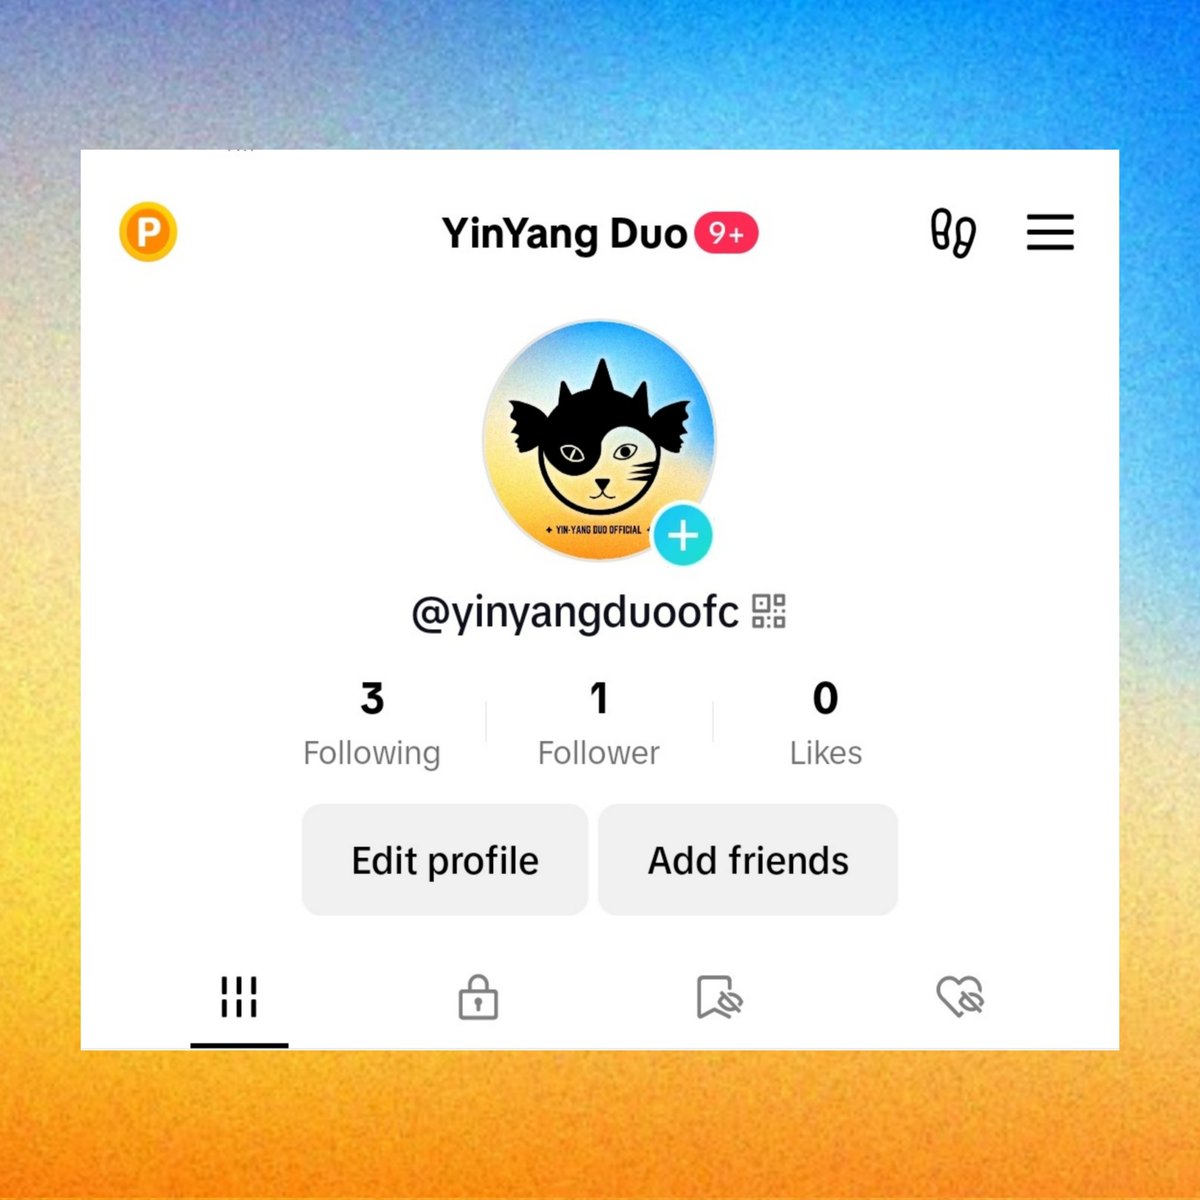 We are glad to see the amount of love you're showing for our Yinyang duo. ☯️

For more contents, we introduce to you our Yinyang Duo's official Tiktok account!

tiktok.com/@yinyangduoofc…

Stay tuned! ✨

#YinyangDuo
#HORI7ON_VINCI
#HORI7ON_JEROMY